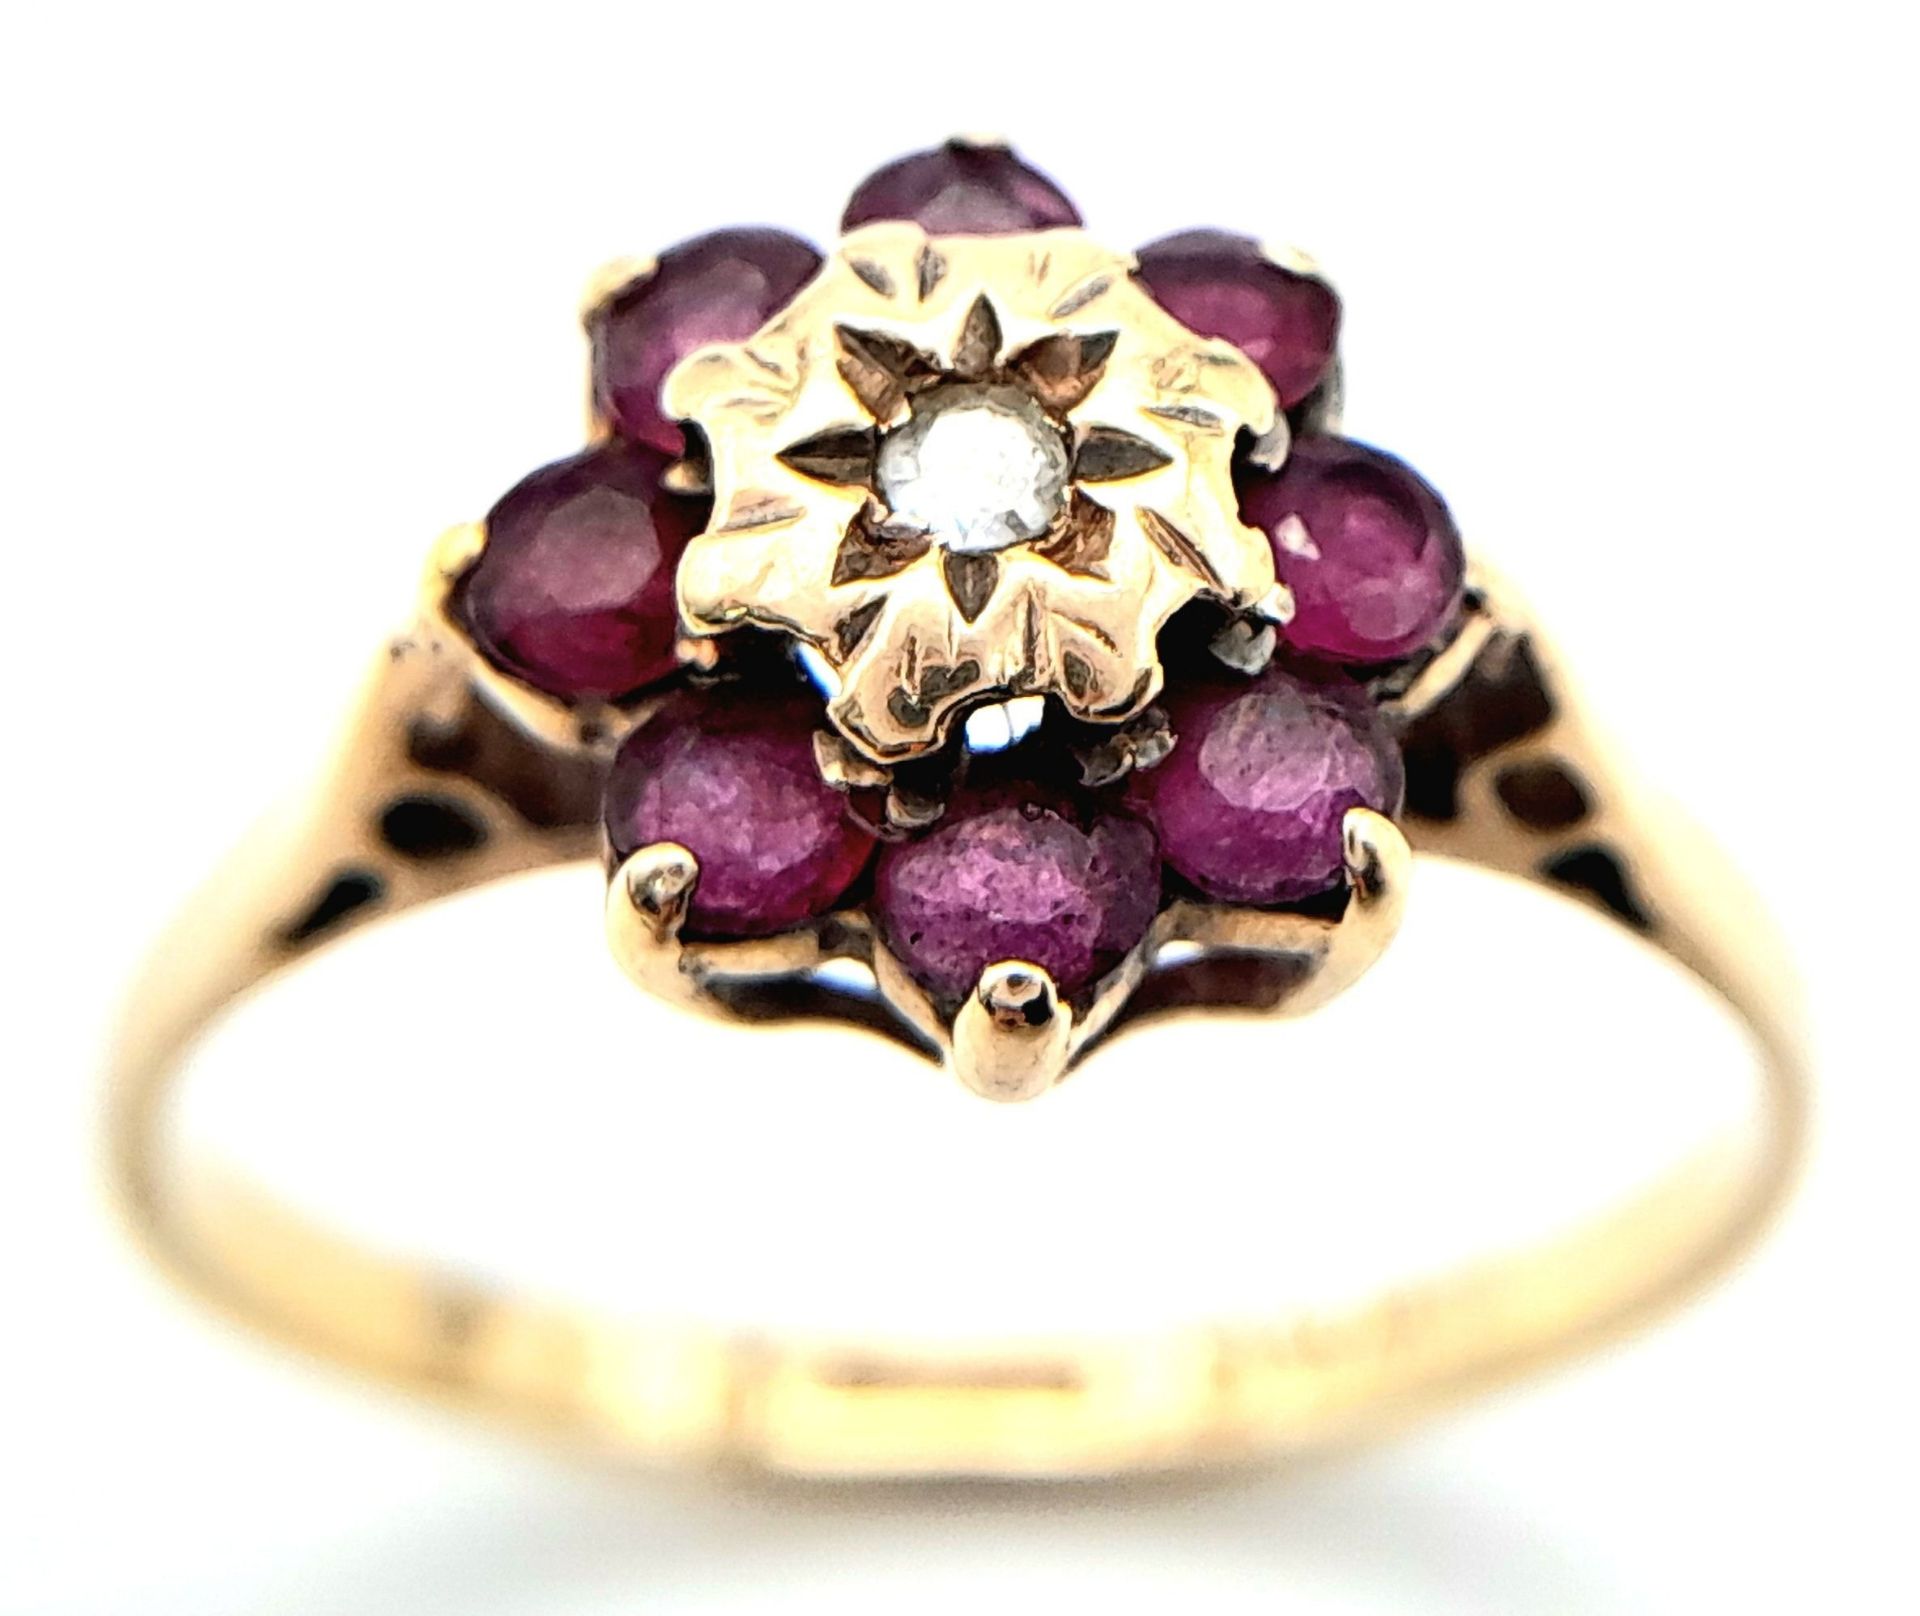 A 9K YELLOW GOLD DIAMOND & RUBY CLUSTER RING. Size M, 1.7g total weight. Ref: SC 8015 - Image 2 of 6